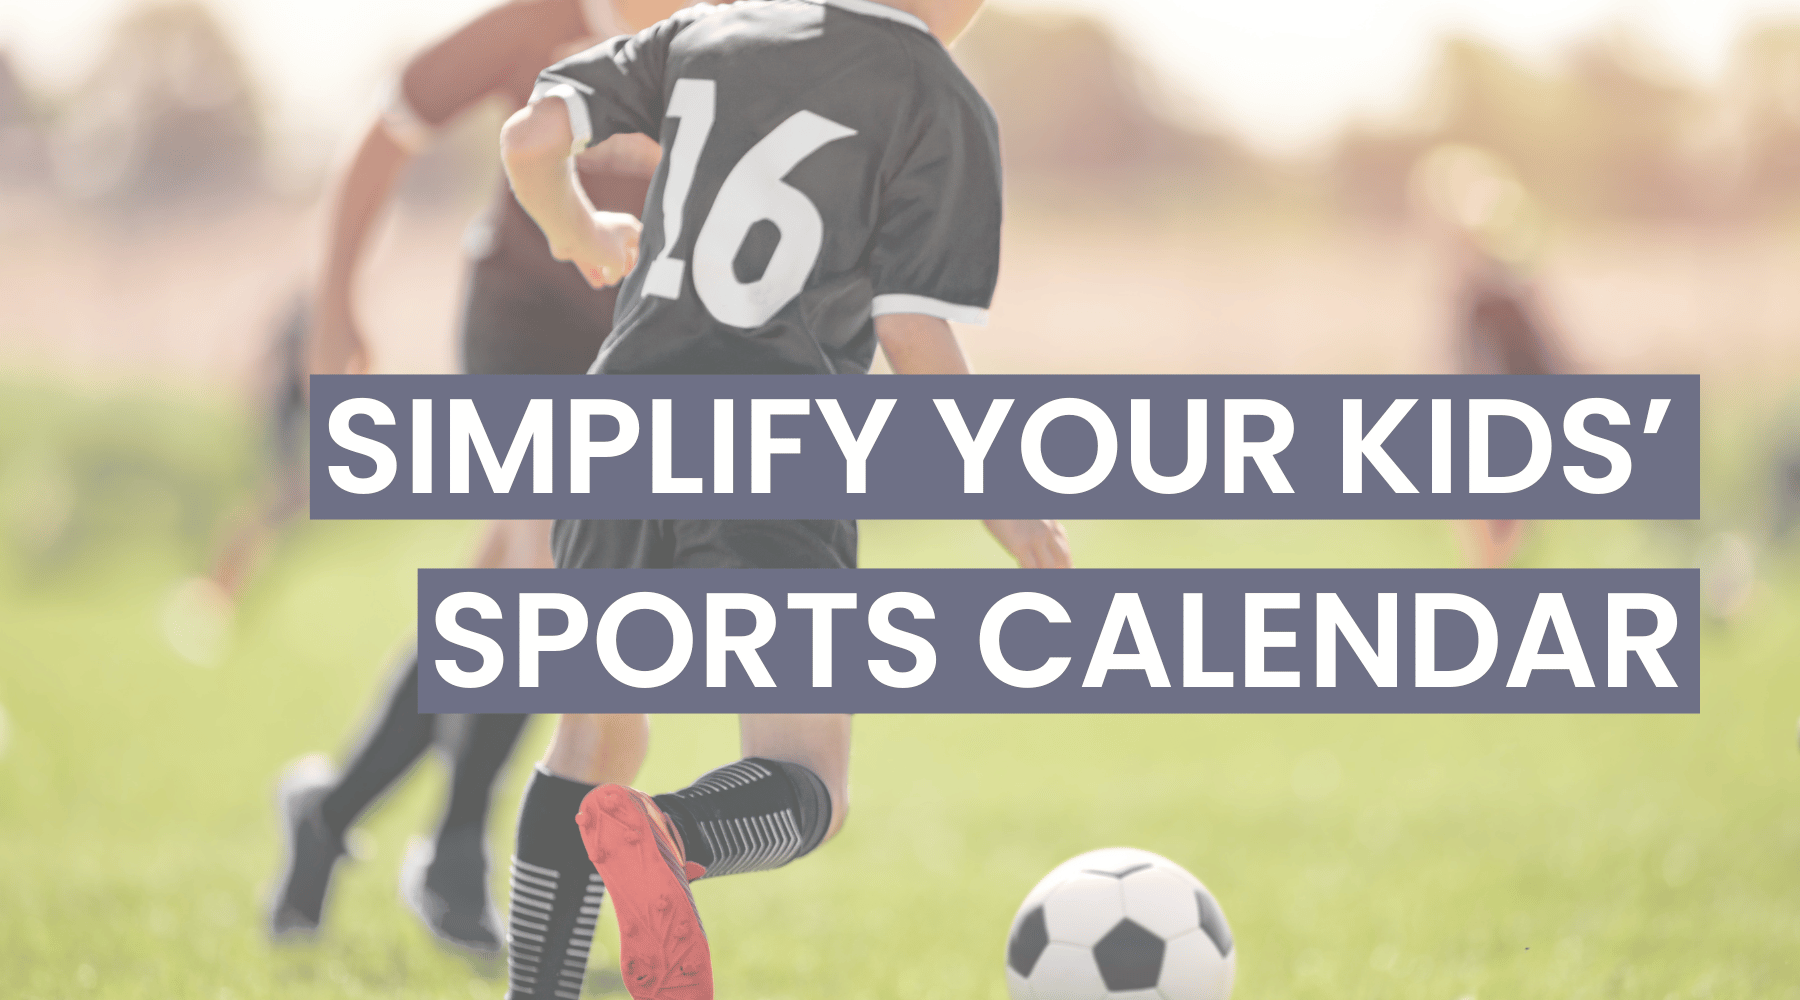 Game On: Simplify your Kids' Sports Calendar